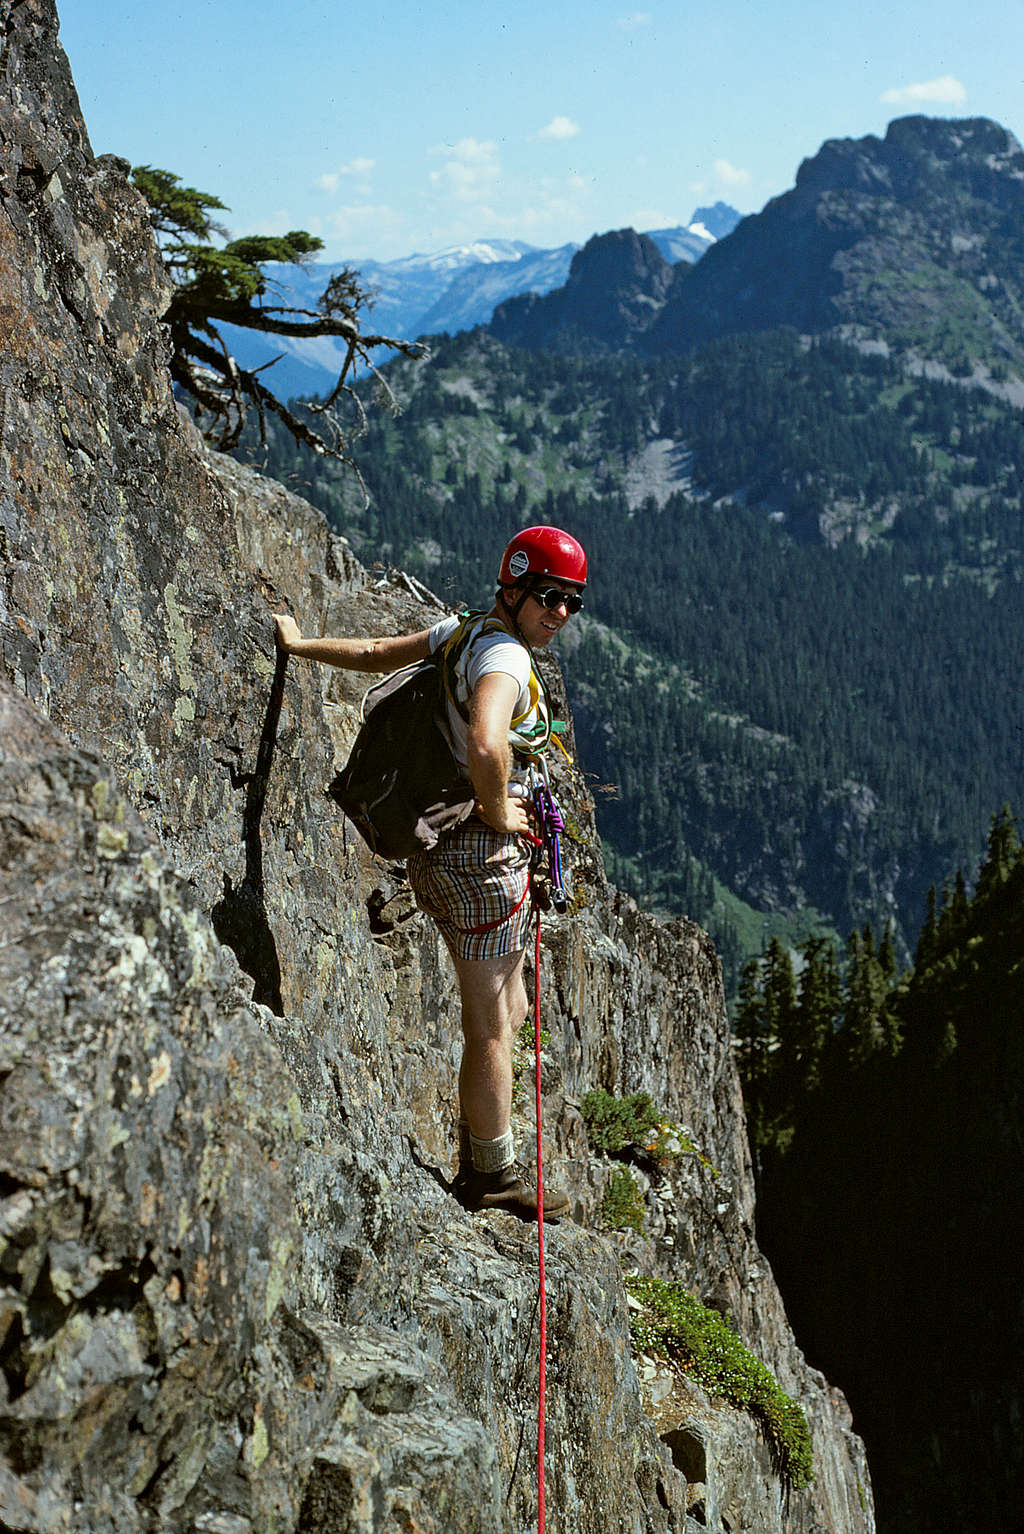 On the South Face